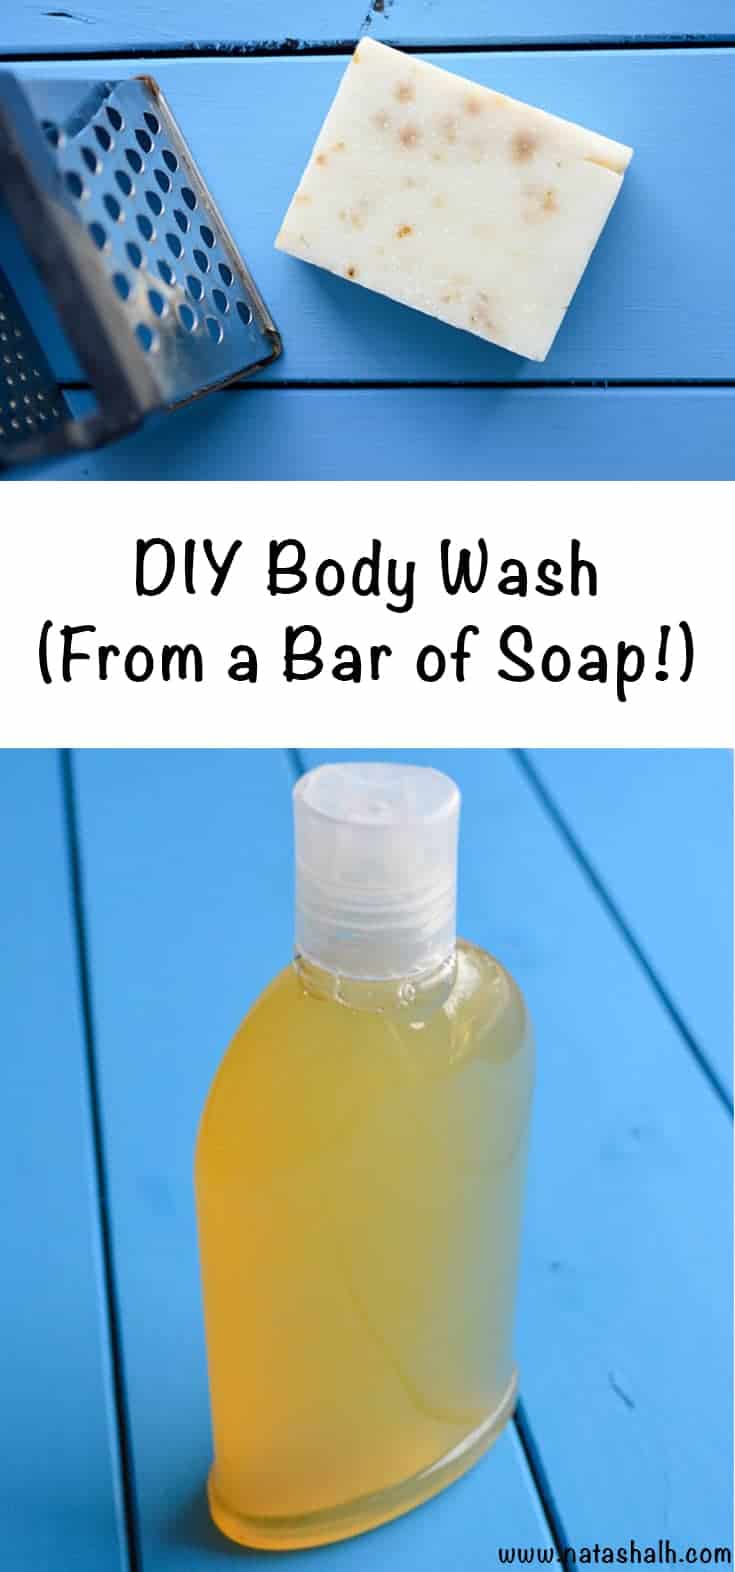 DIY body wash from a bar of soap